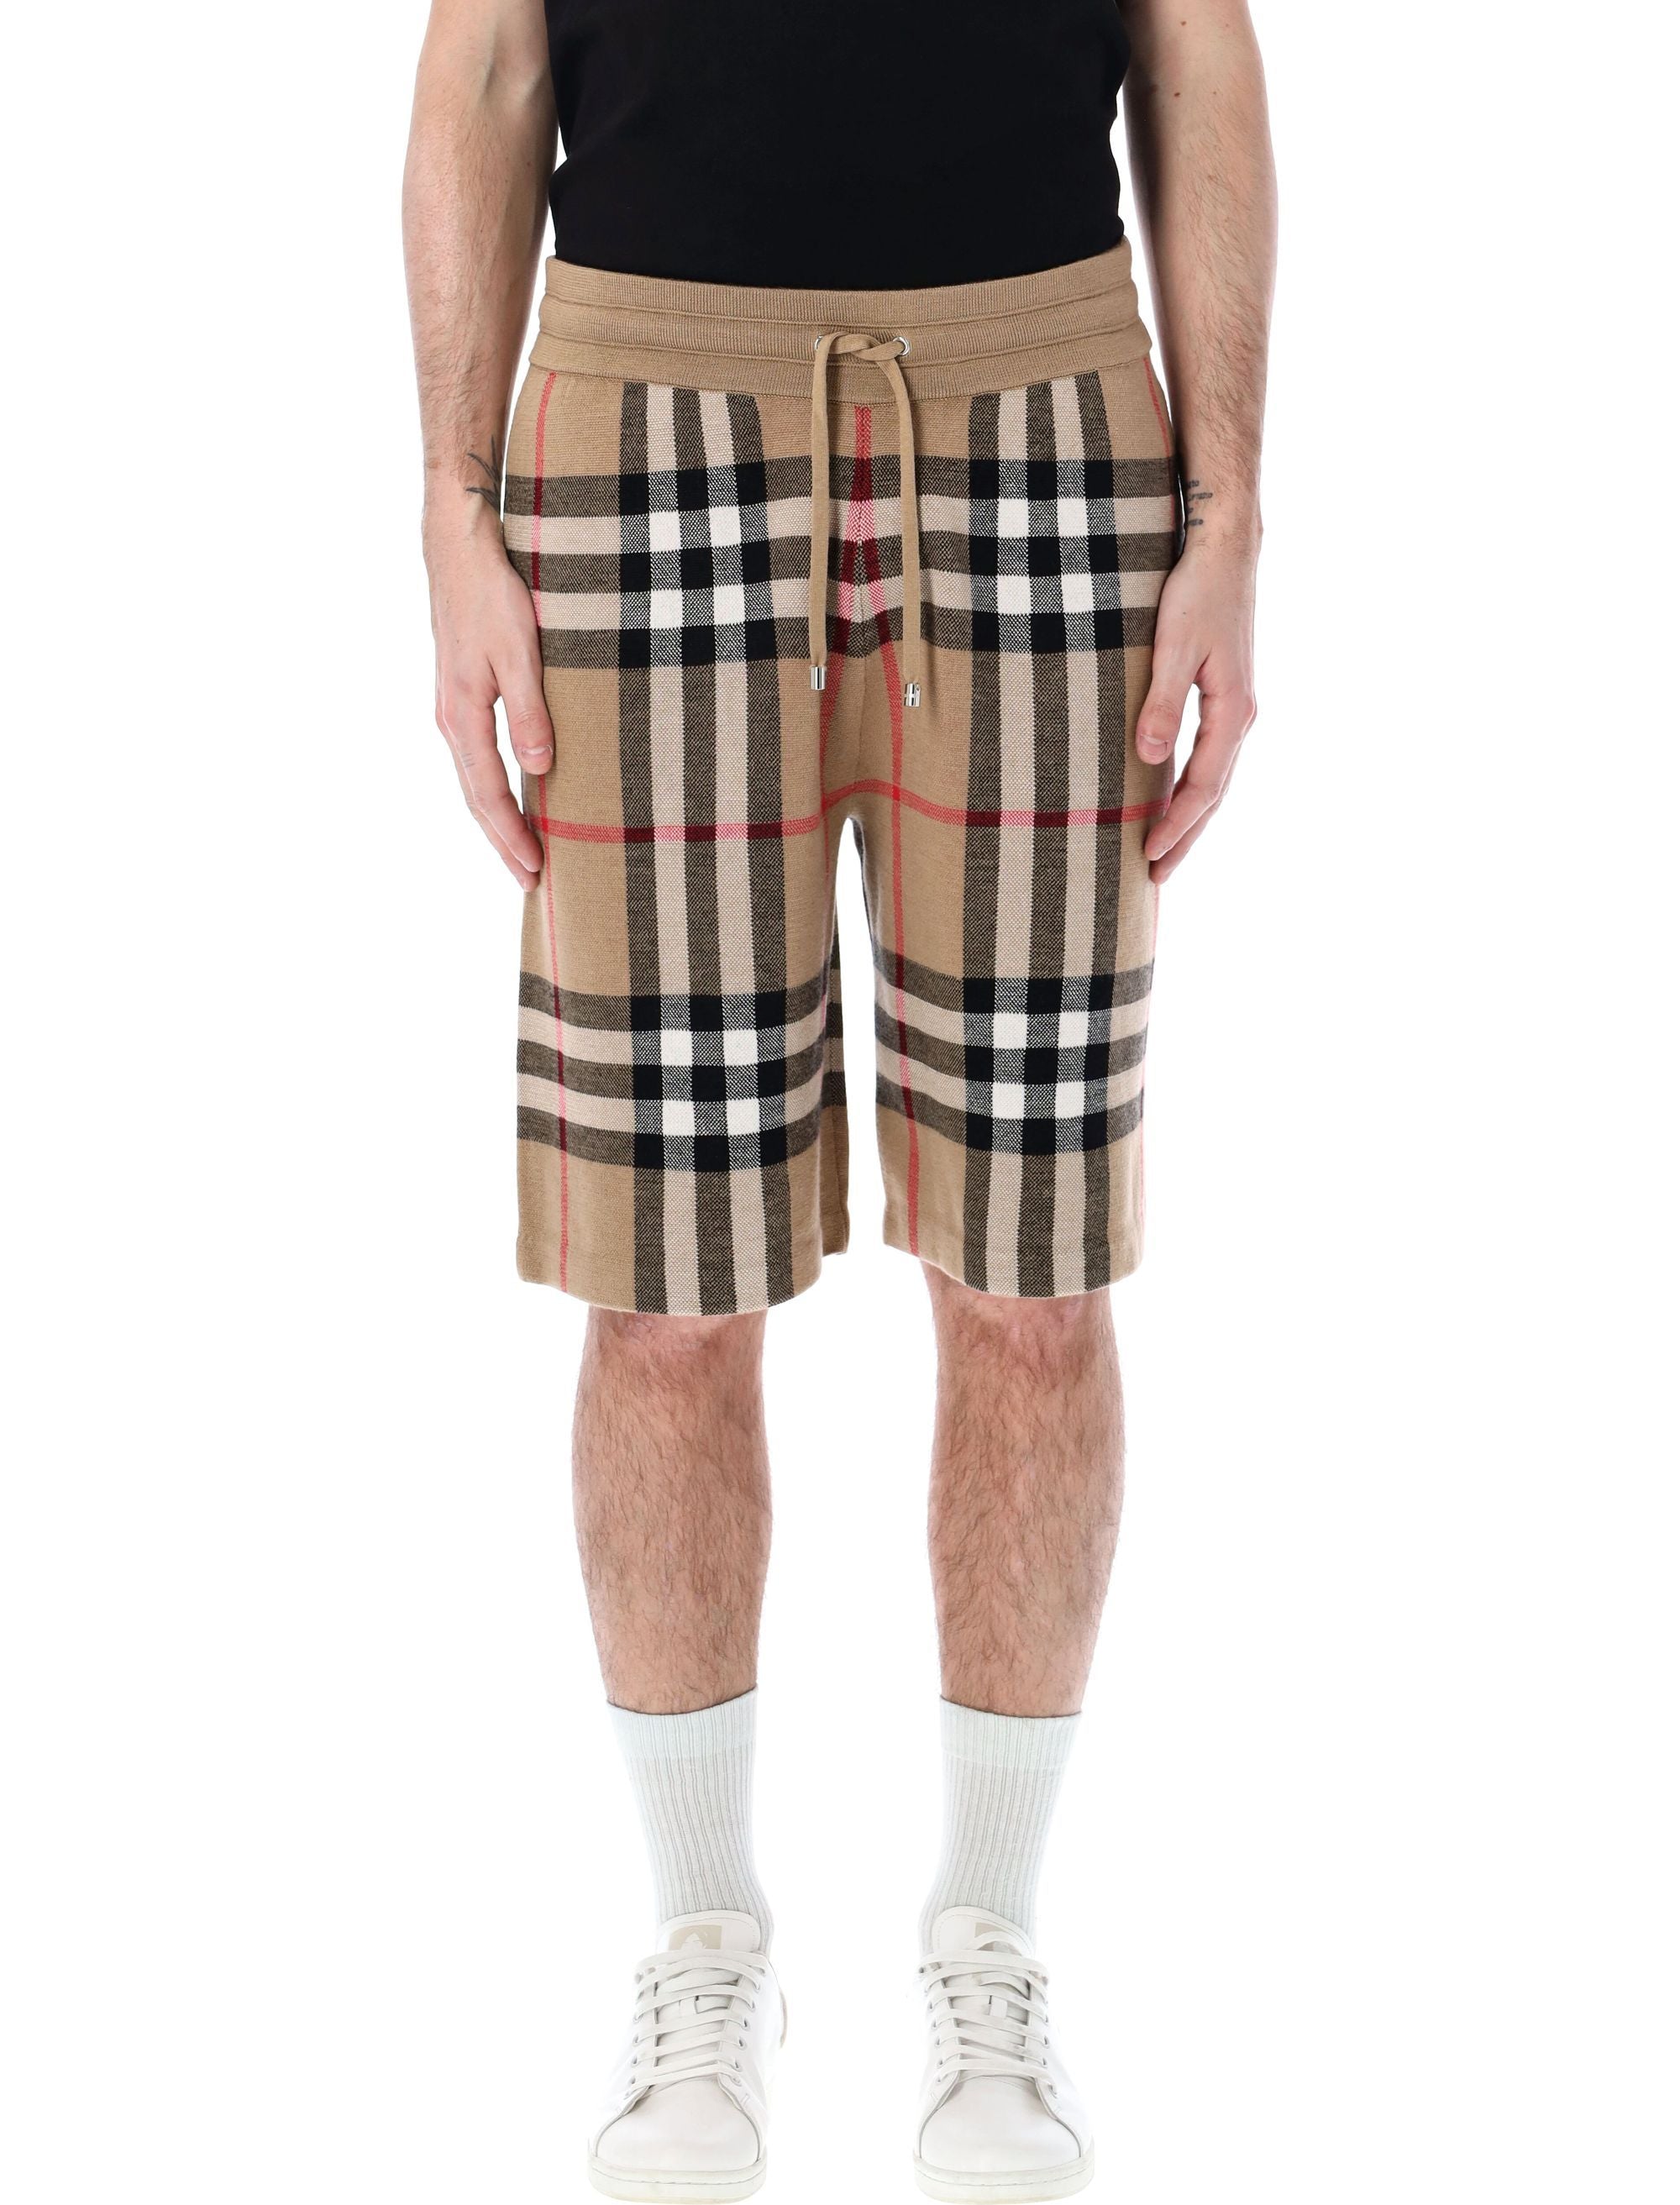 Burberry Checkered Silk And Wool Blend Shorts For Men In Archive Beige In Tan